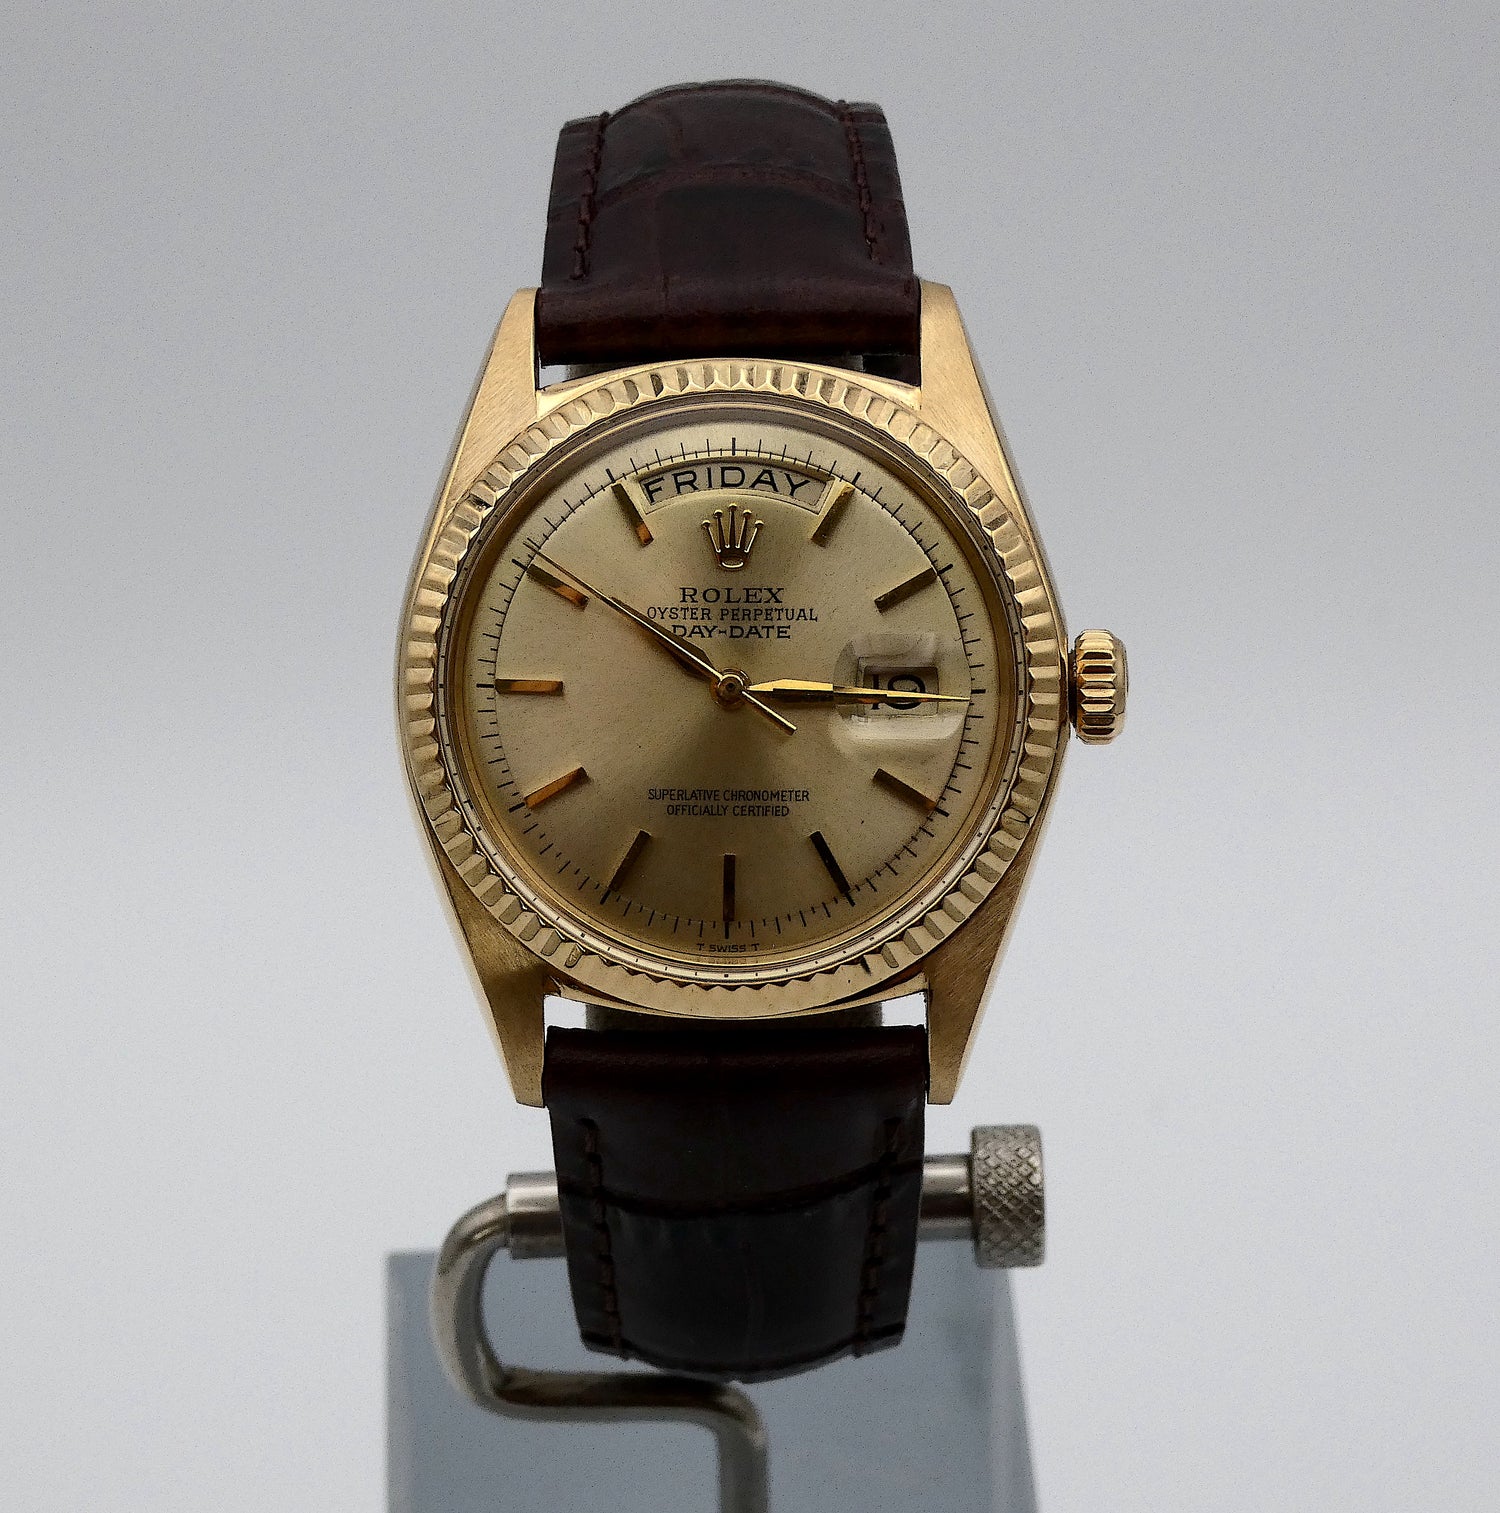 SOLD Day-Date 1803 / 1963 / Serviced + warranty